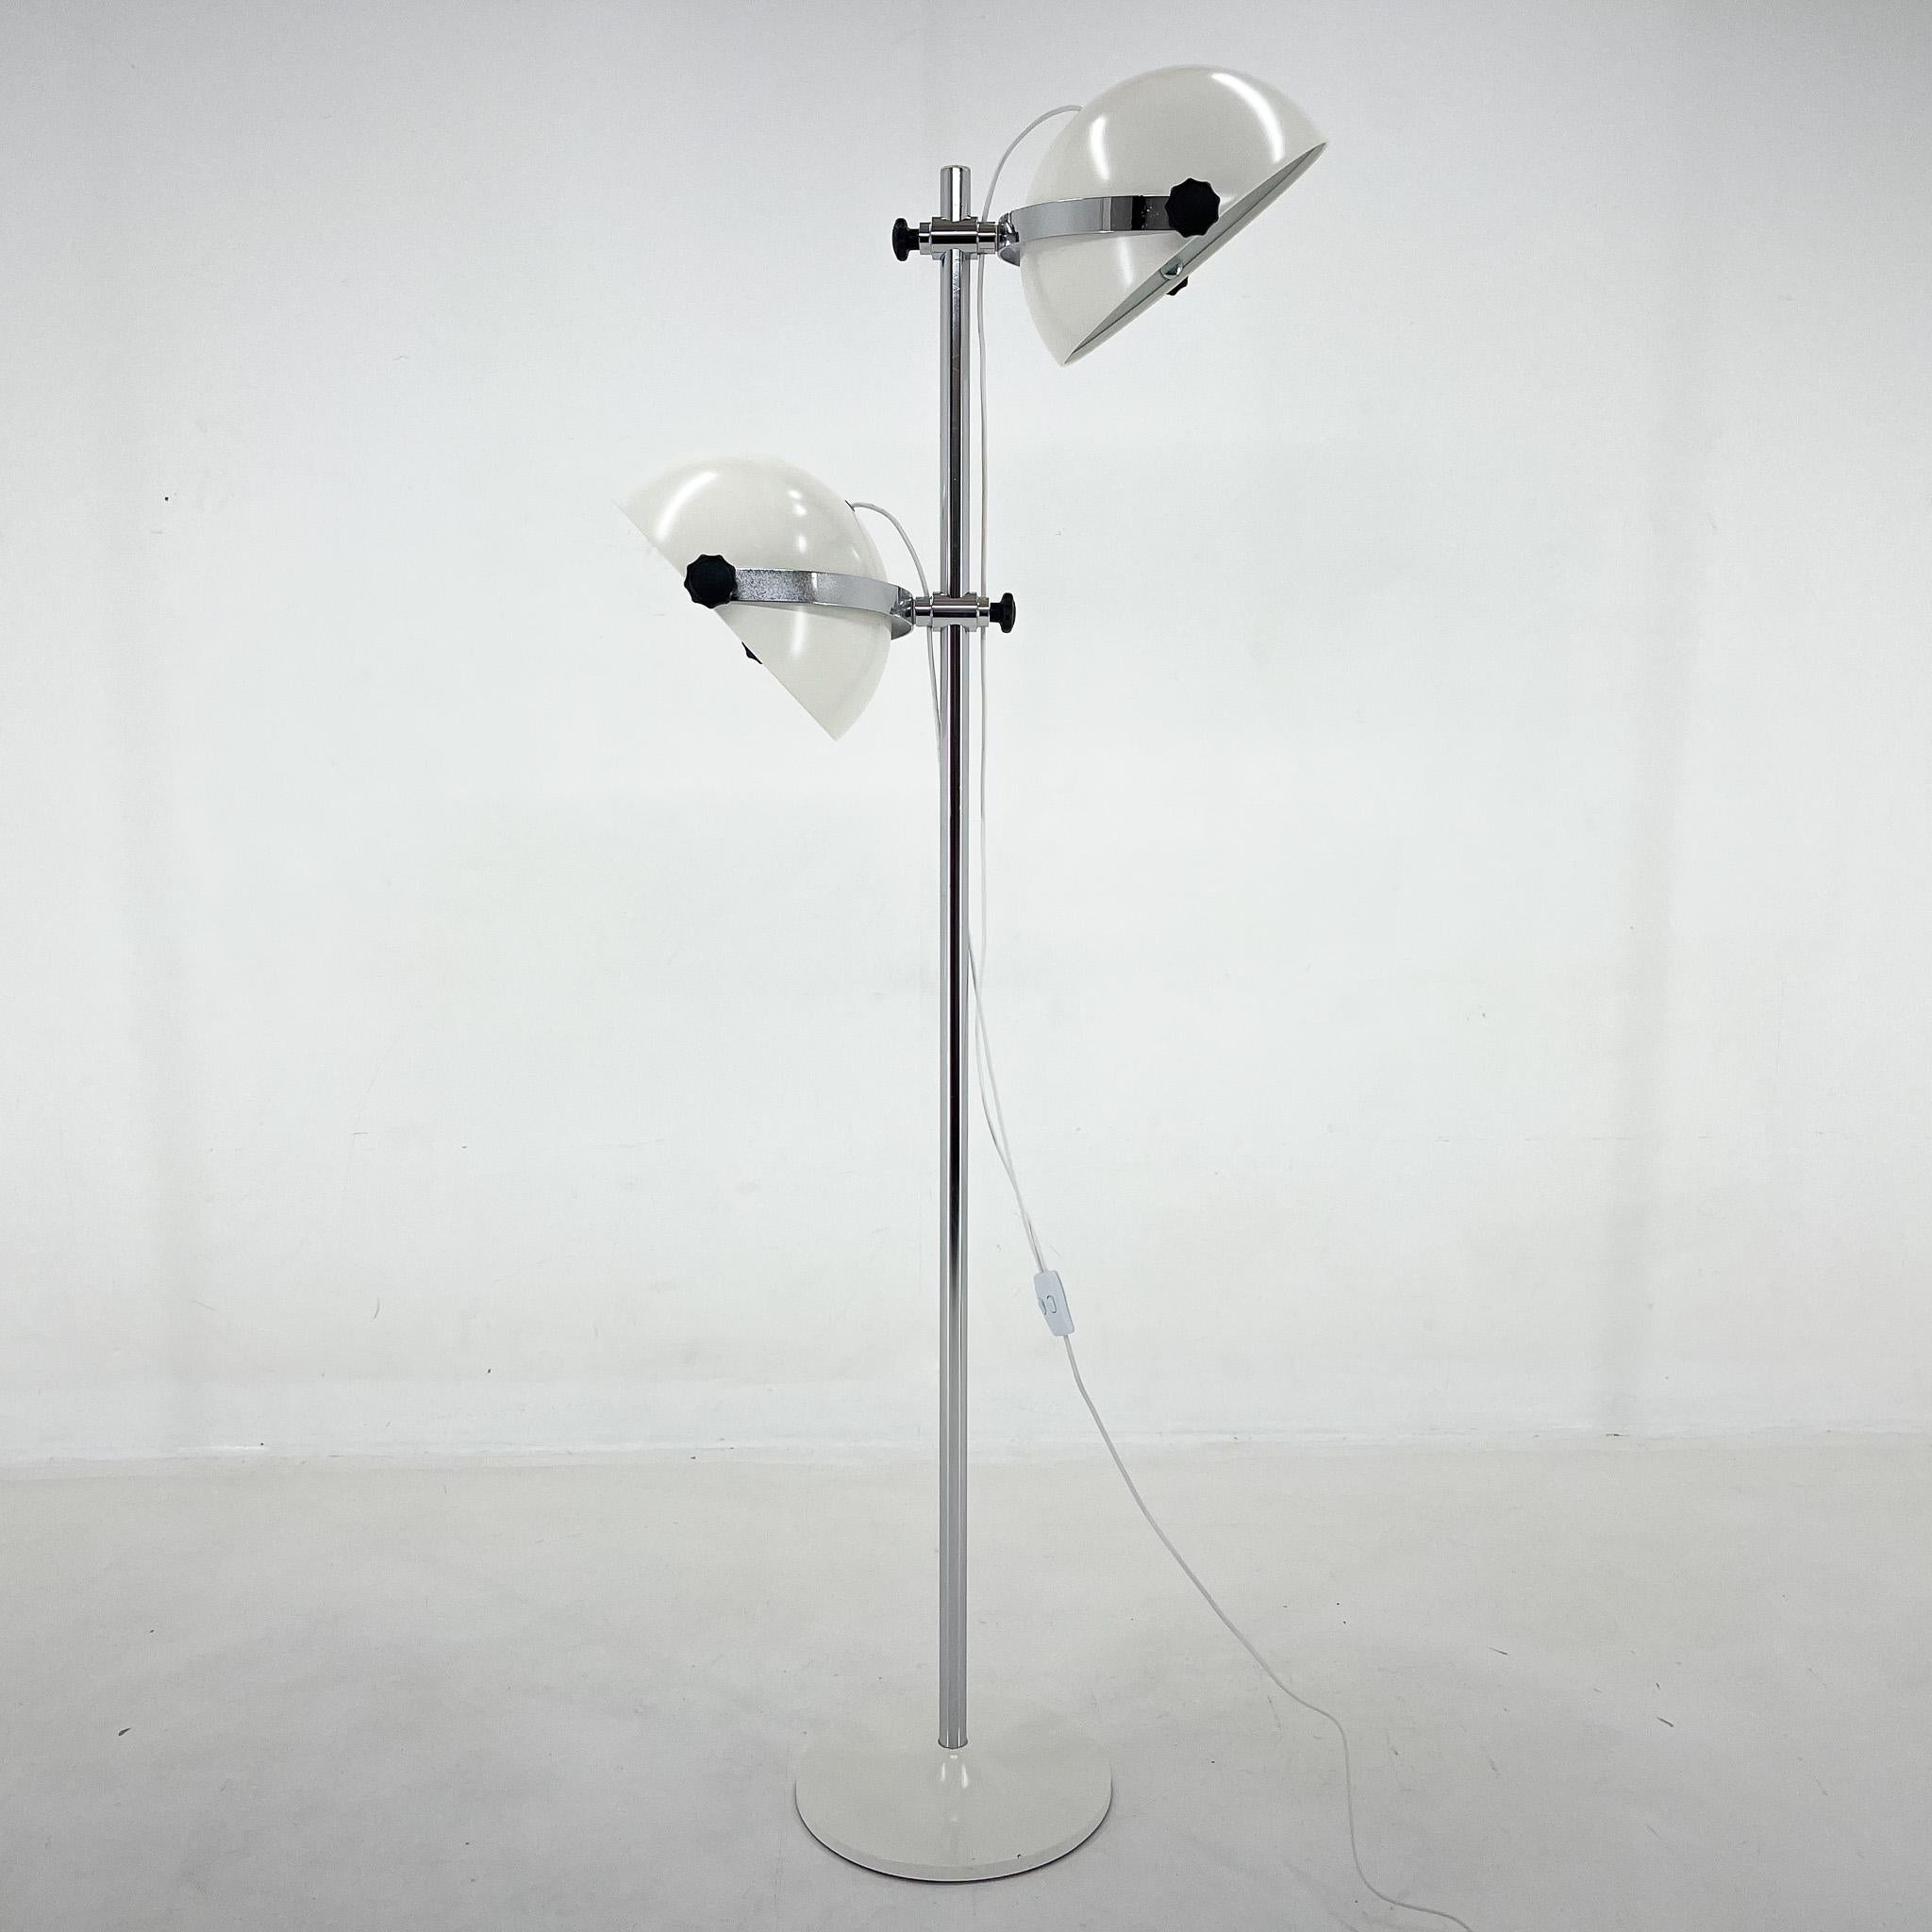 Rare chrome and laquered metal floor lamp, made in Italy in the 1970's. Both lamp shades are adjustable in all directions. The lamp is fully restored and rewired with some signs of use on the chromed parts. The two lights can be lit separatelly.